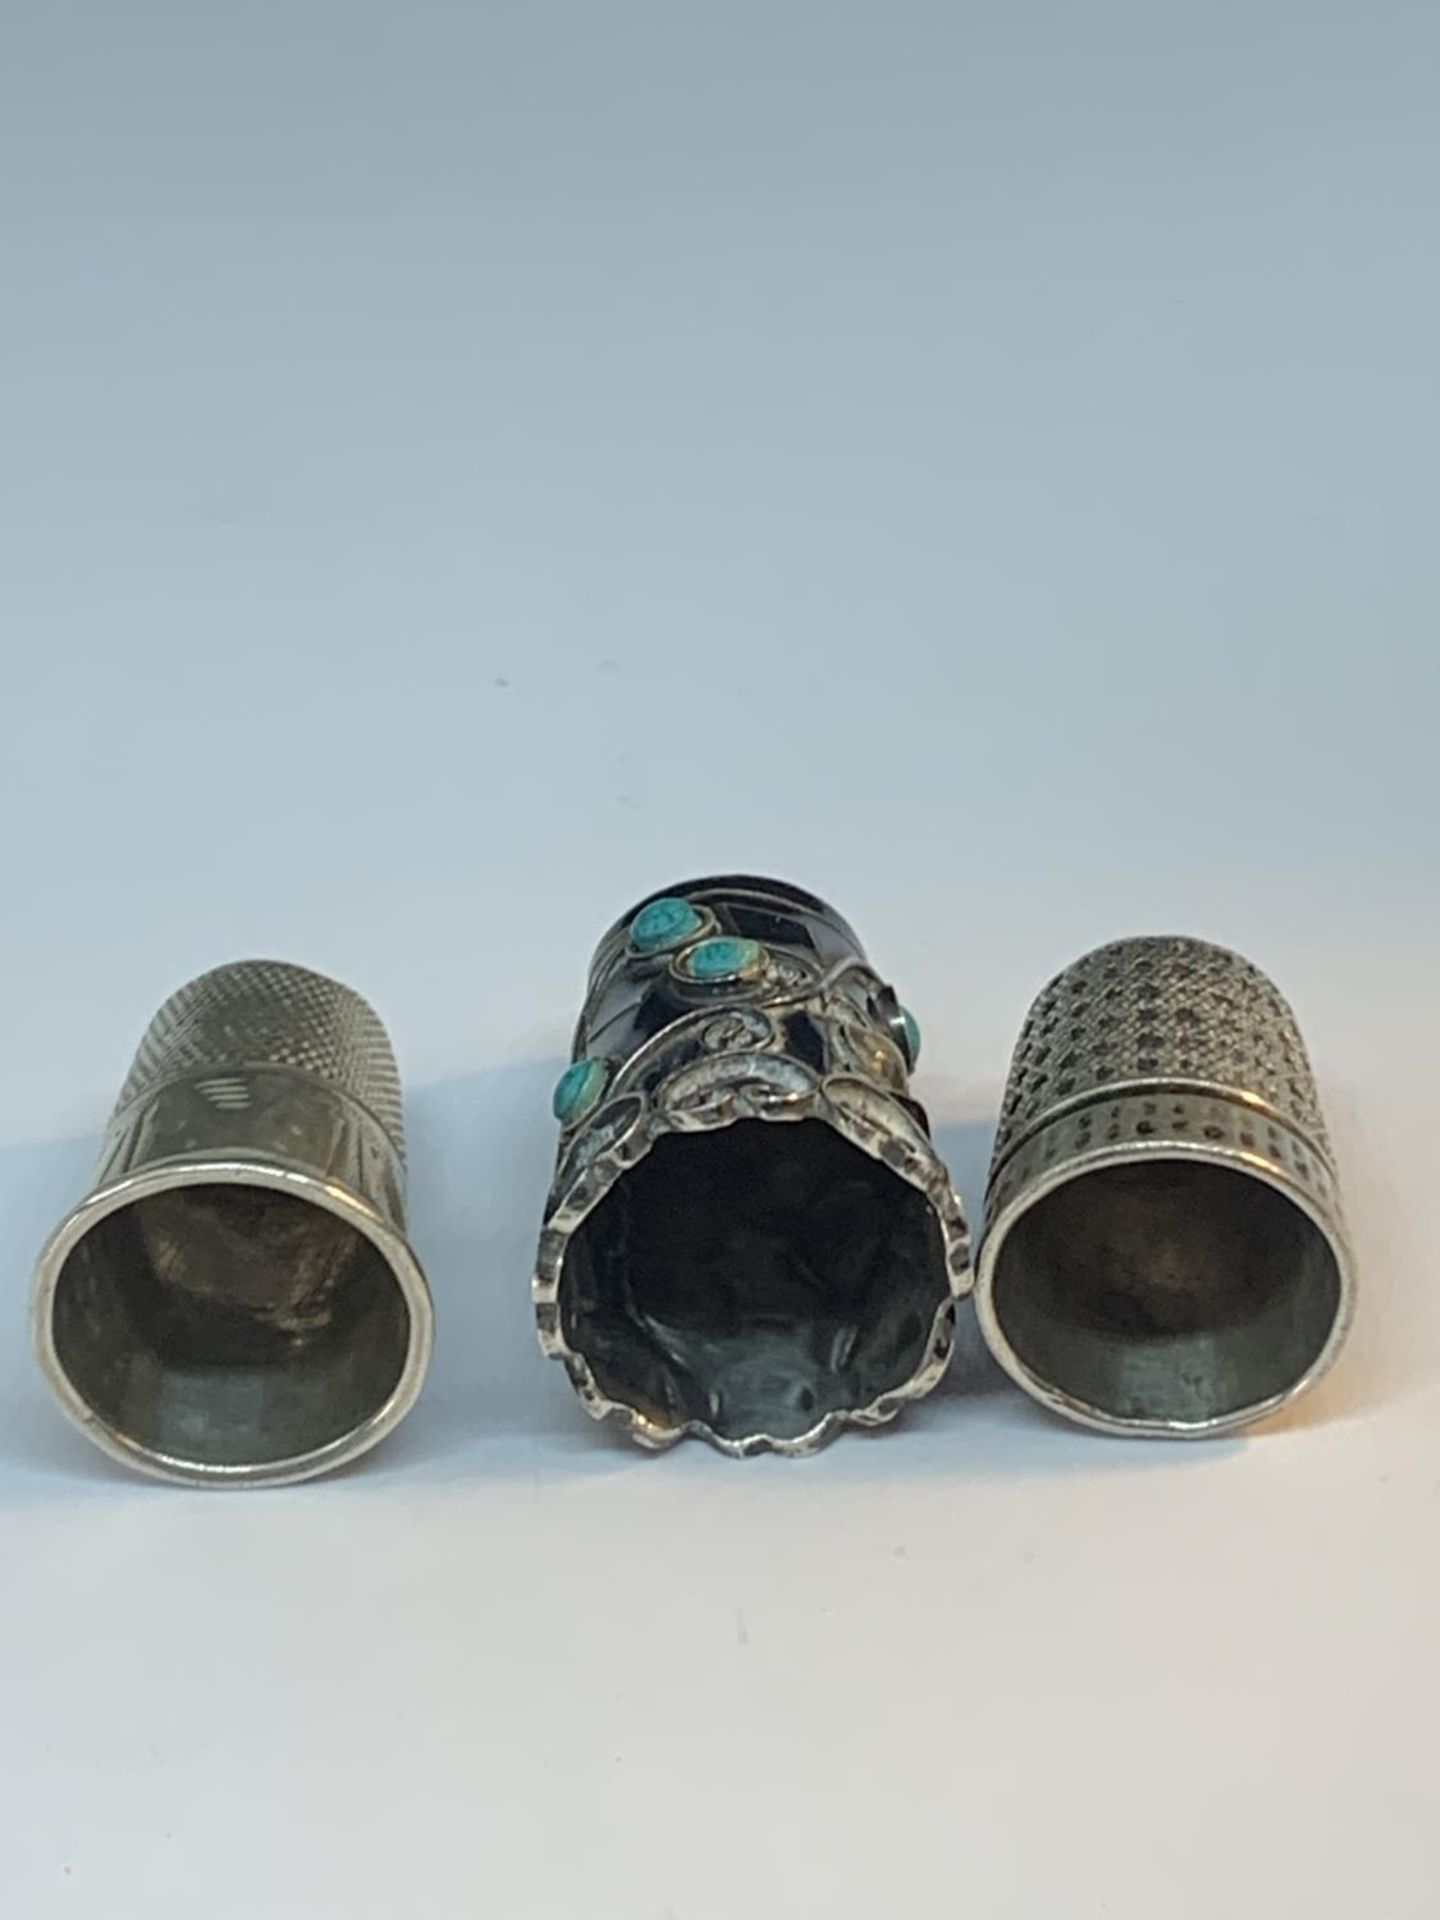 THREE THIMBLES ONE WITH DECORATIVE TURQUOISE STONES - Image 3 of 3